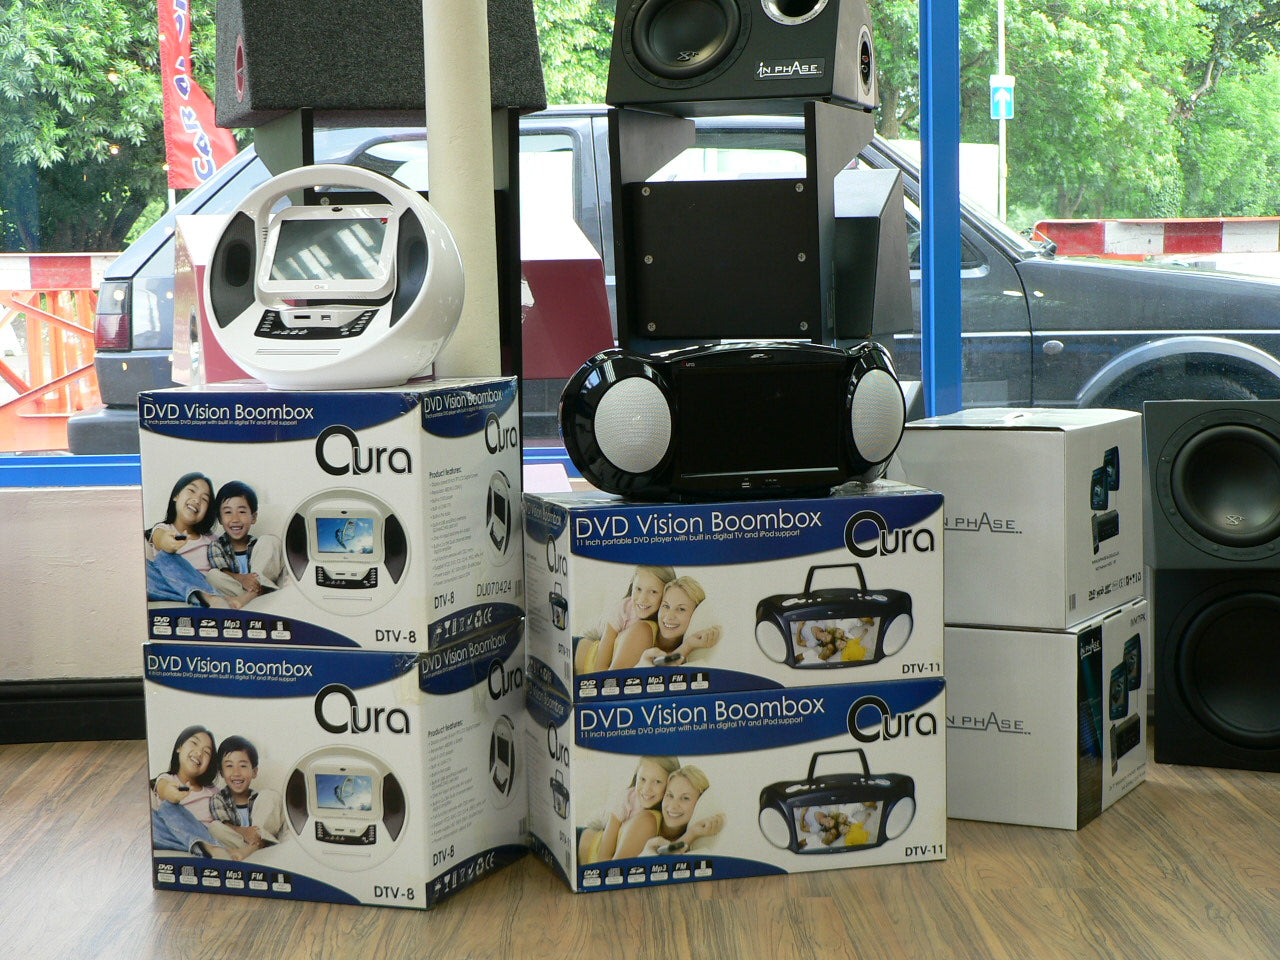 The world cup comes to Car Audio Center Leicester with the arival of the NEW!! Aura DVD Boombox